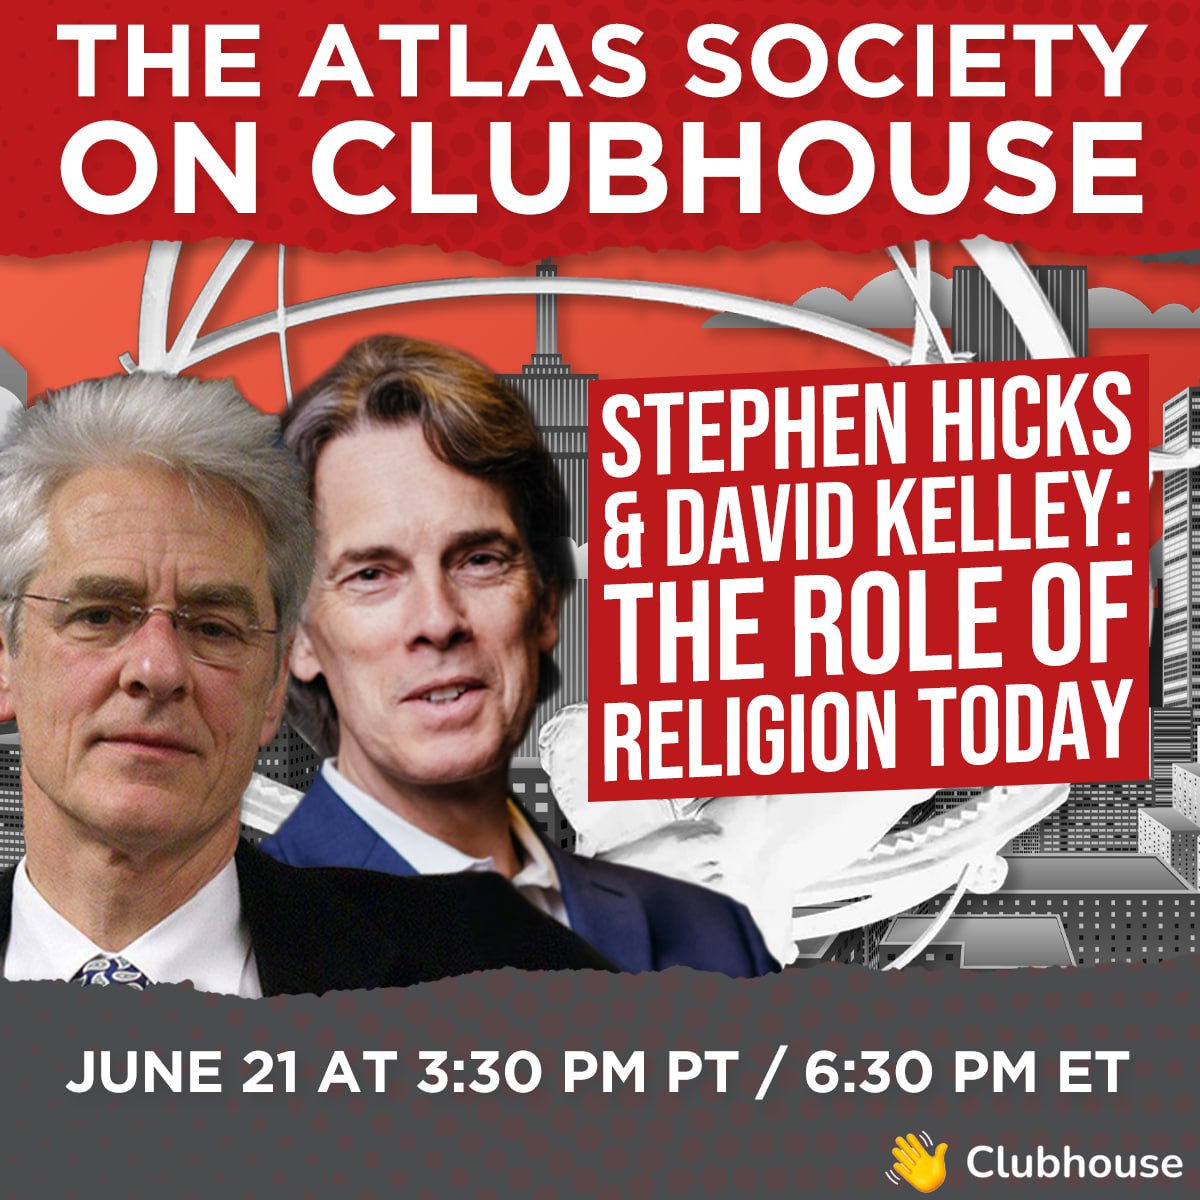 Stephen Hicks & David Kelley - The Role of Religion Today